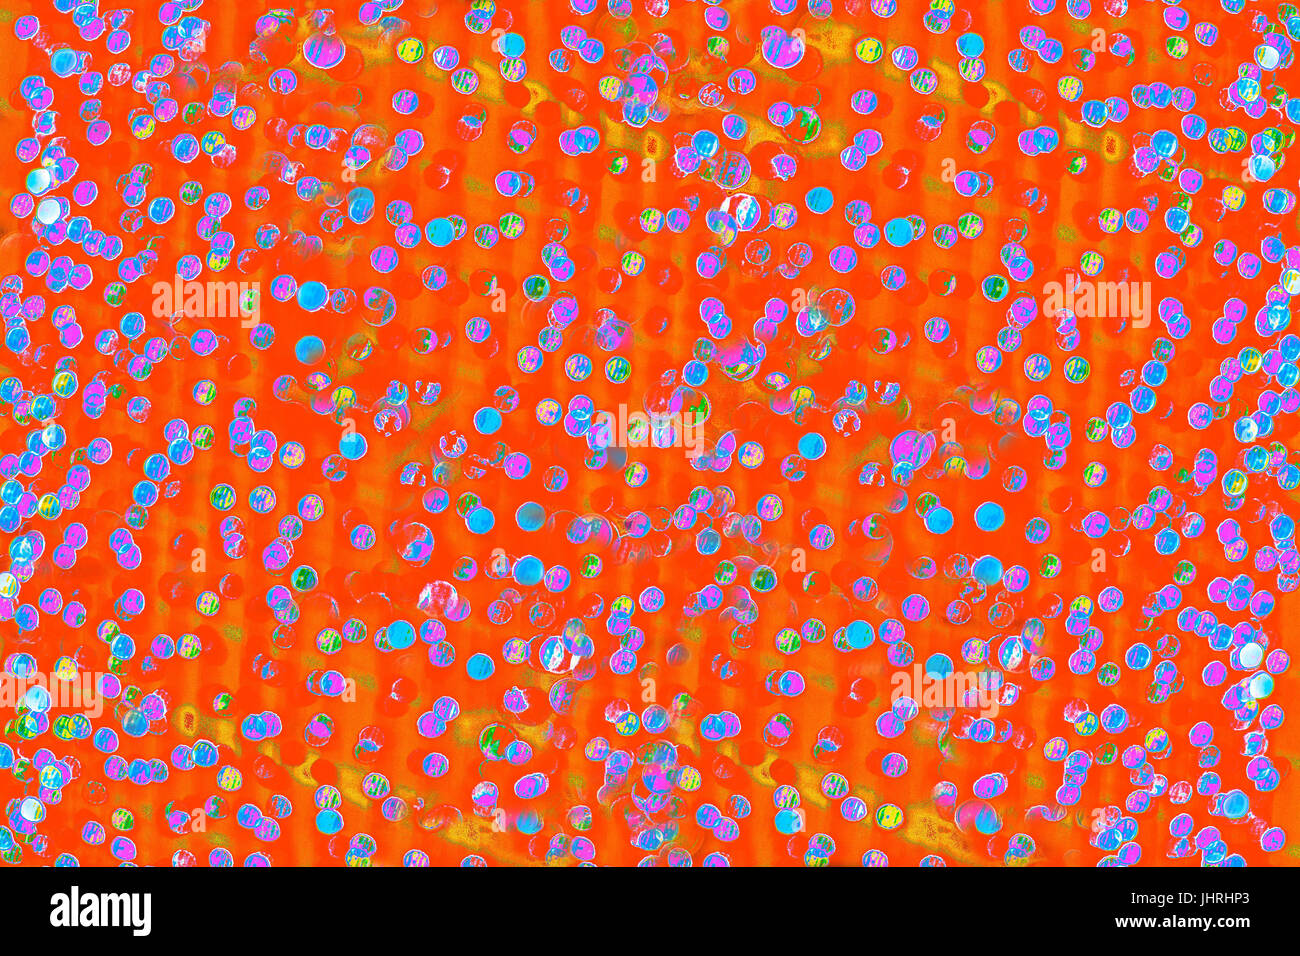 Bokeh-abstraction: Orange-red pop art background filled with cheerful mood Stock Photo